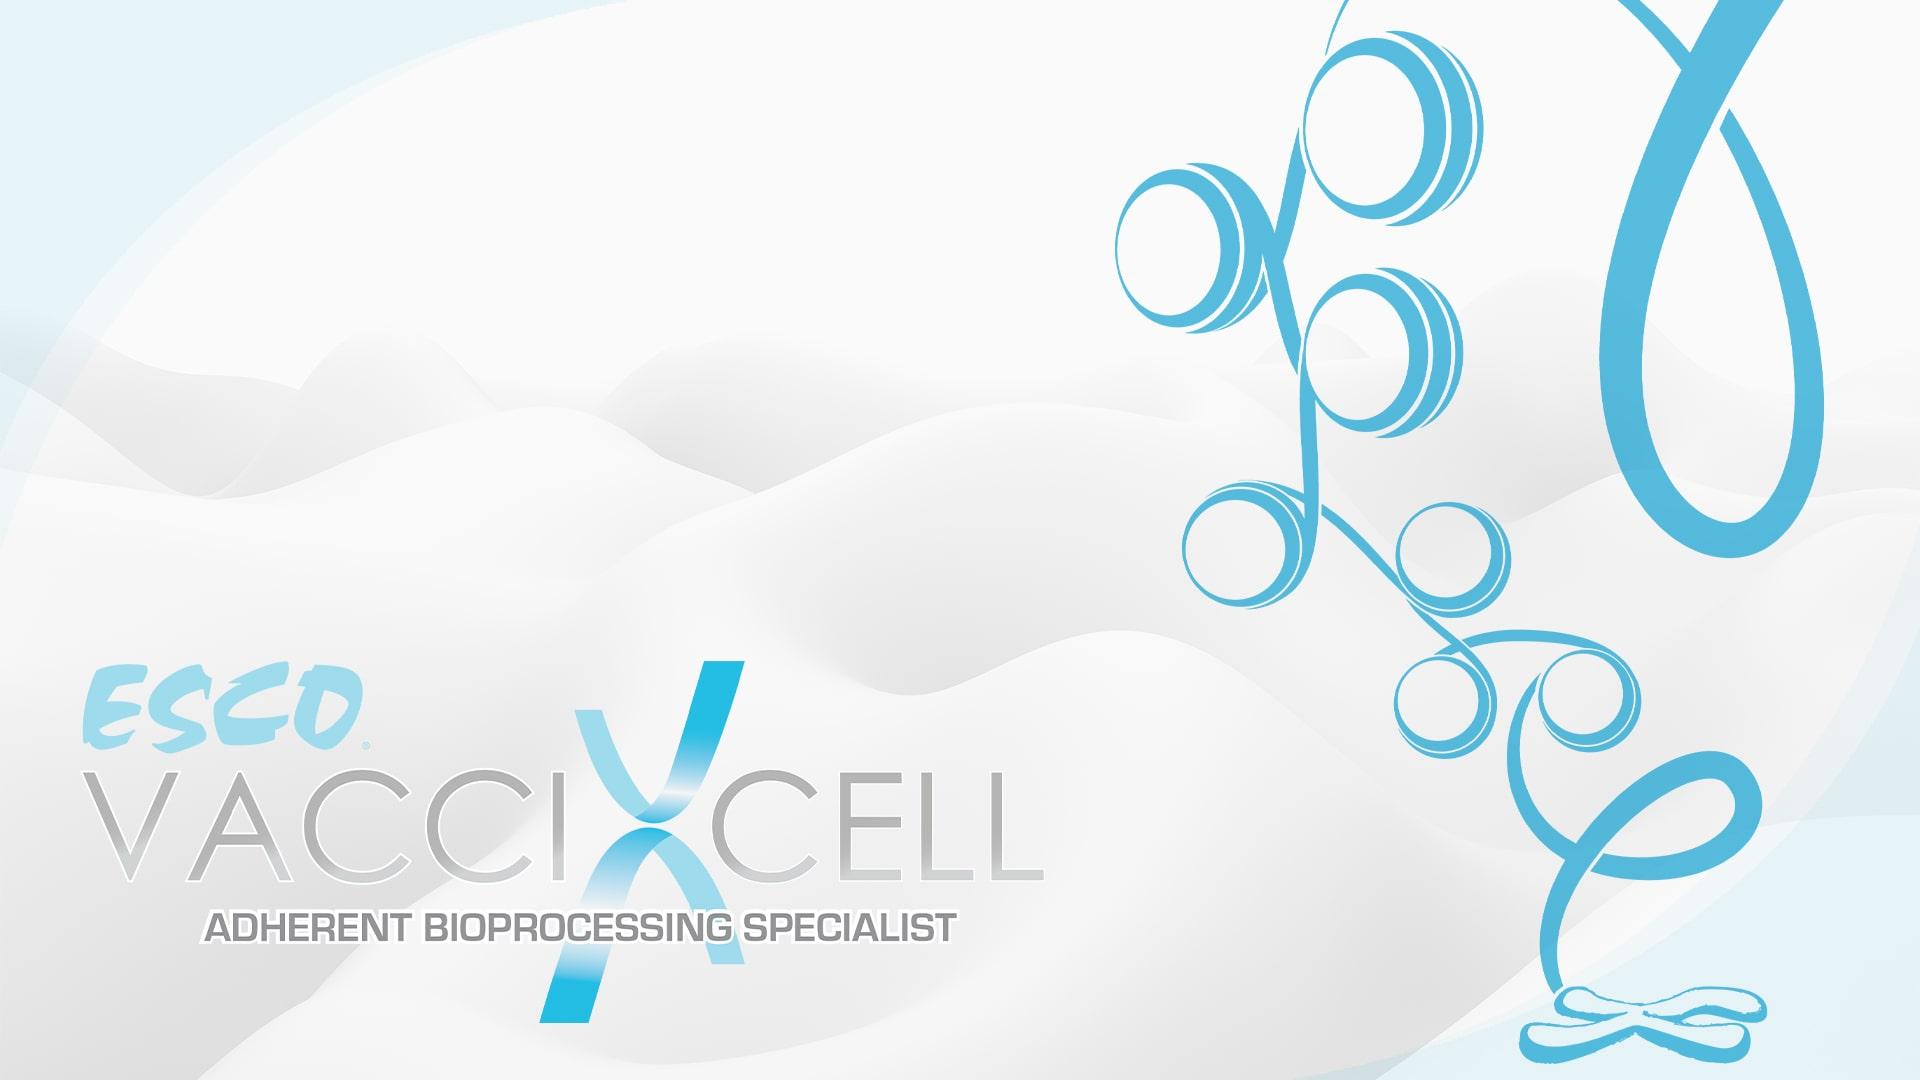 Image for Bioprocessing Products | Esco VacciXcell 